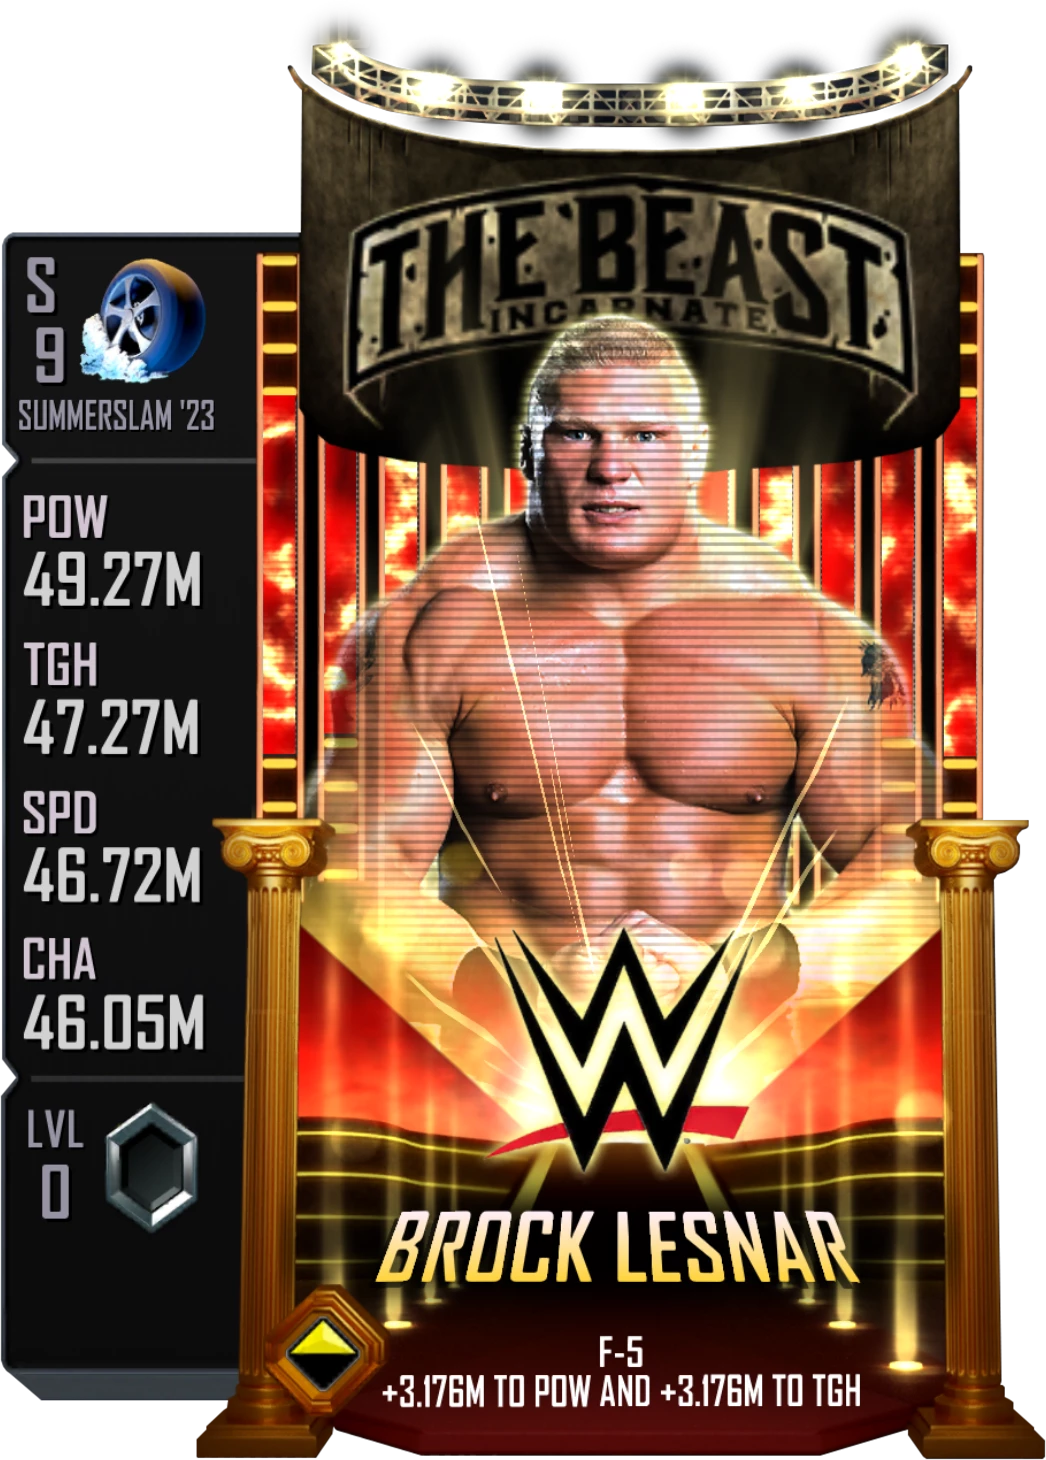 SS23 (SummerSlam '23) - Brock Lesnar (Special Edition) Card from WWE Supercard